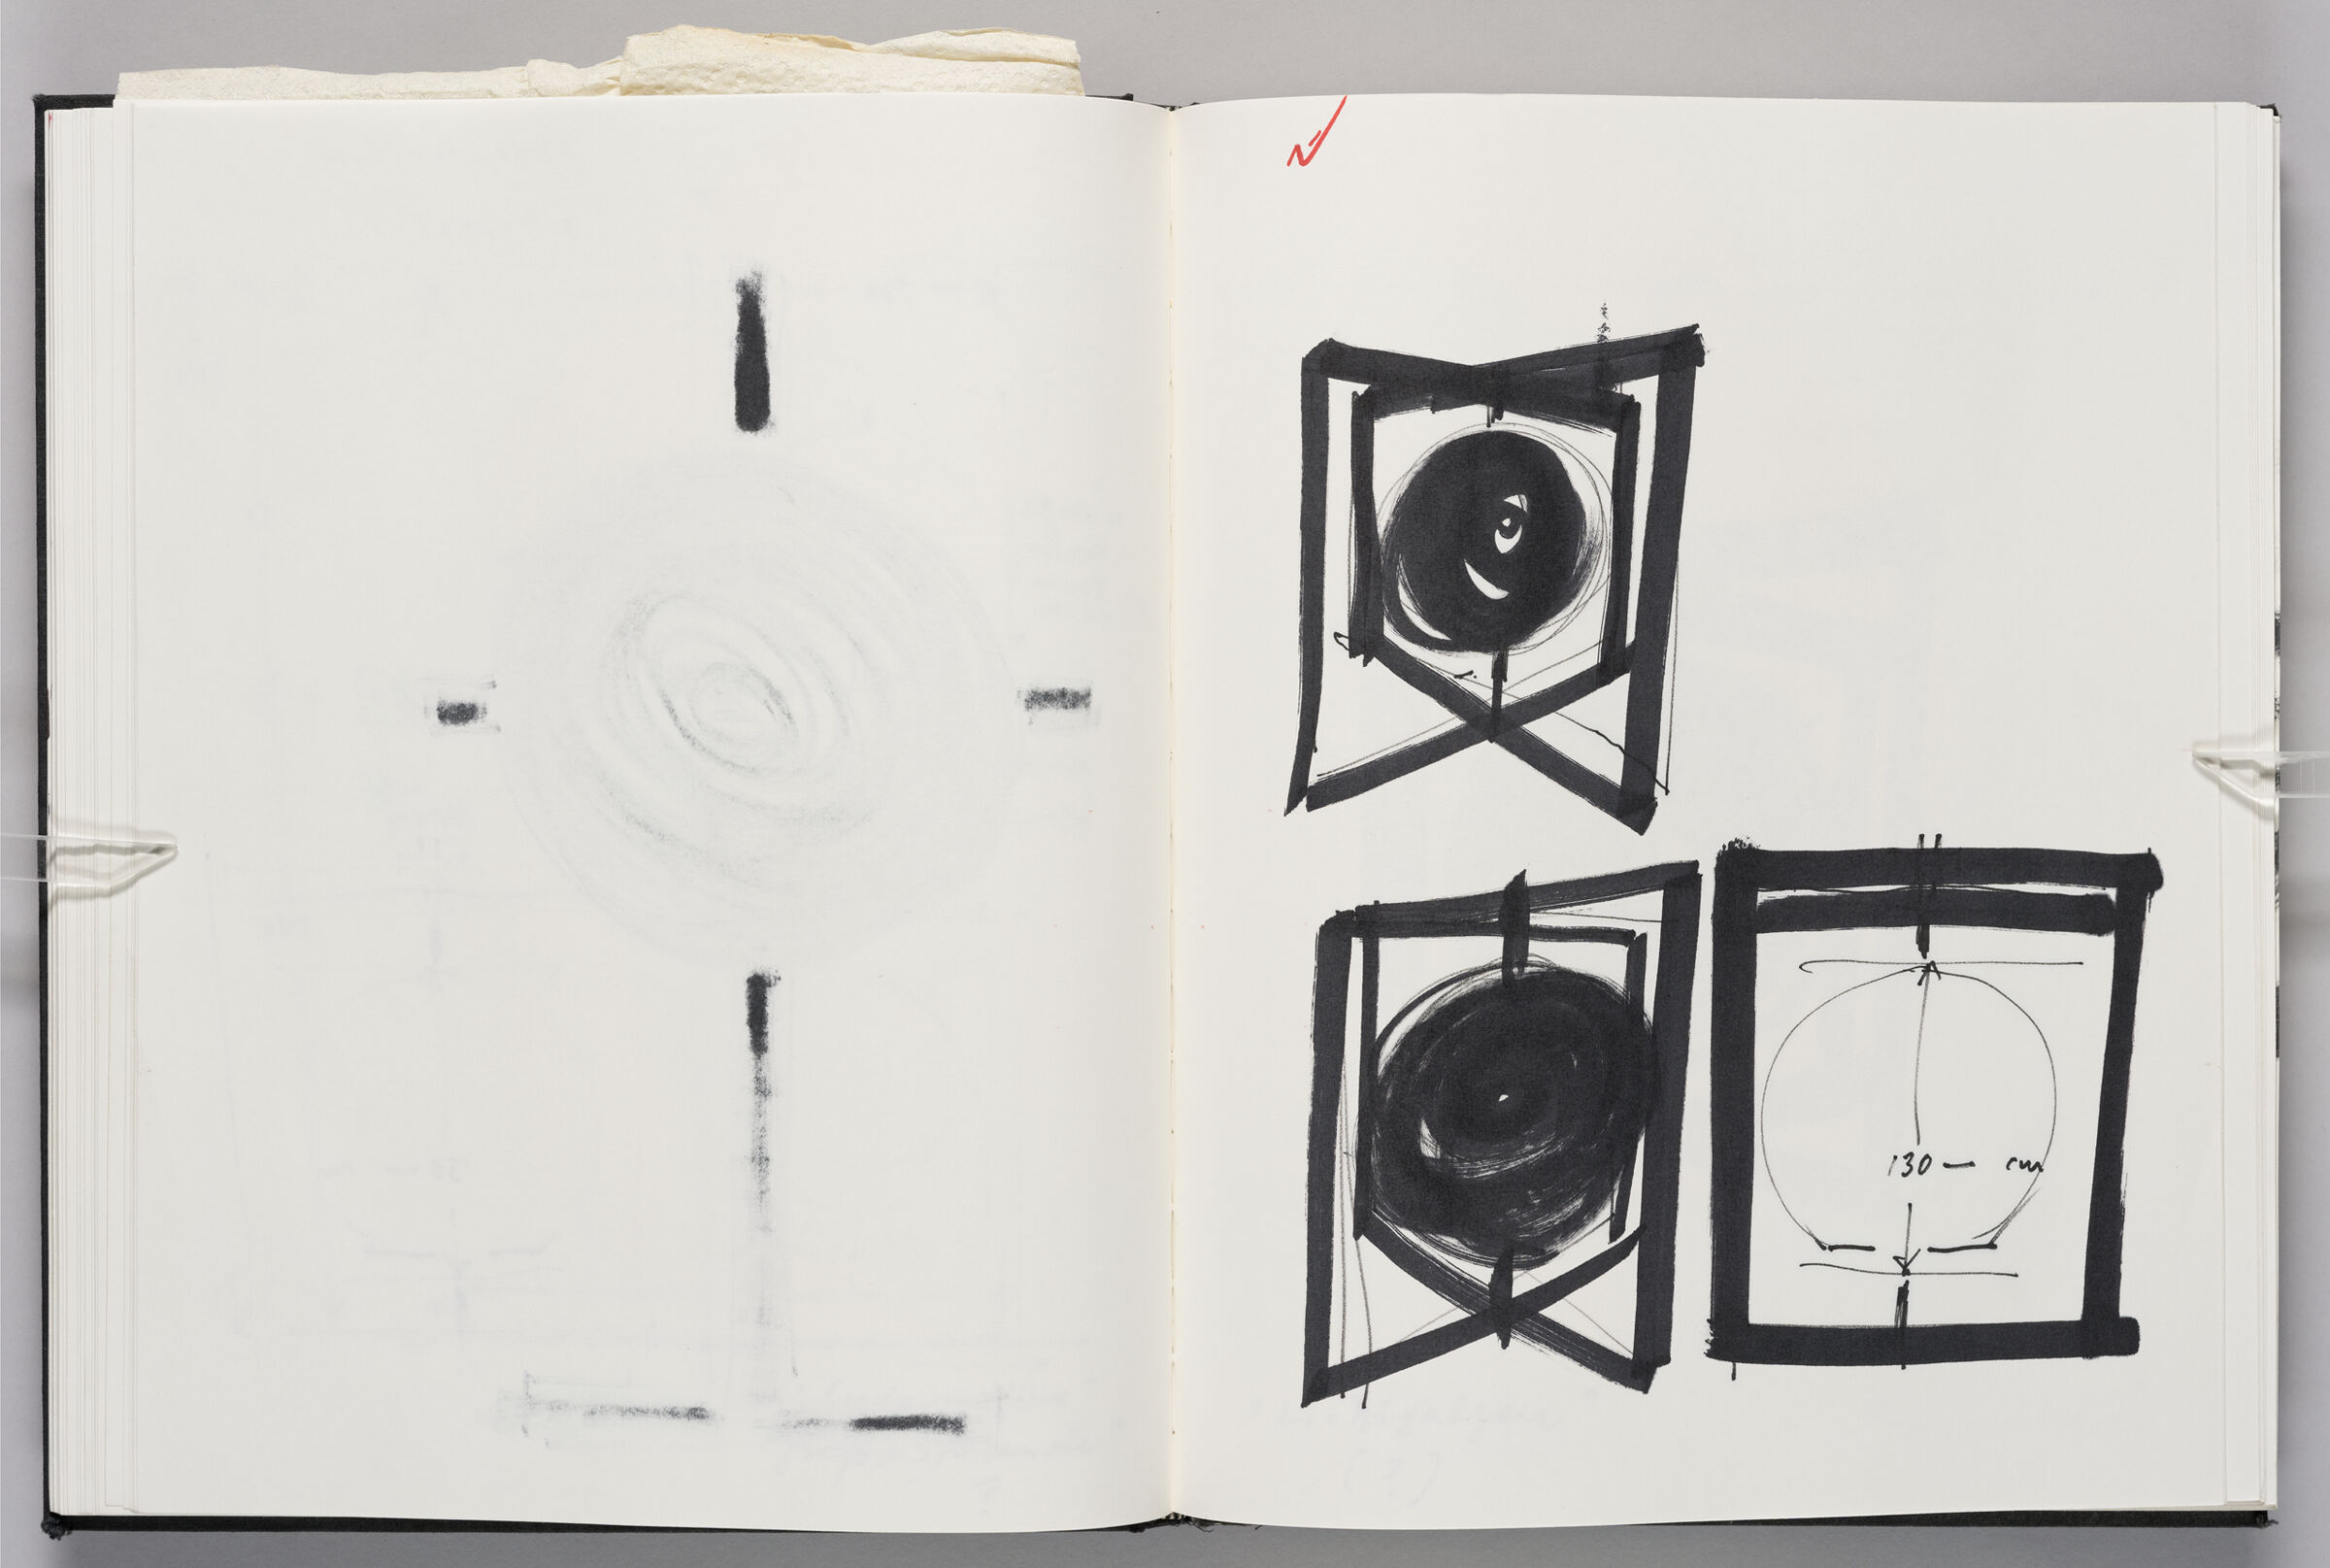 Untitled (Bleed-Through Of Previous Page, Left Page); Untitled (Light Sculpture Designs With Measurement, Right Page)